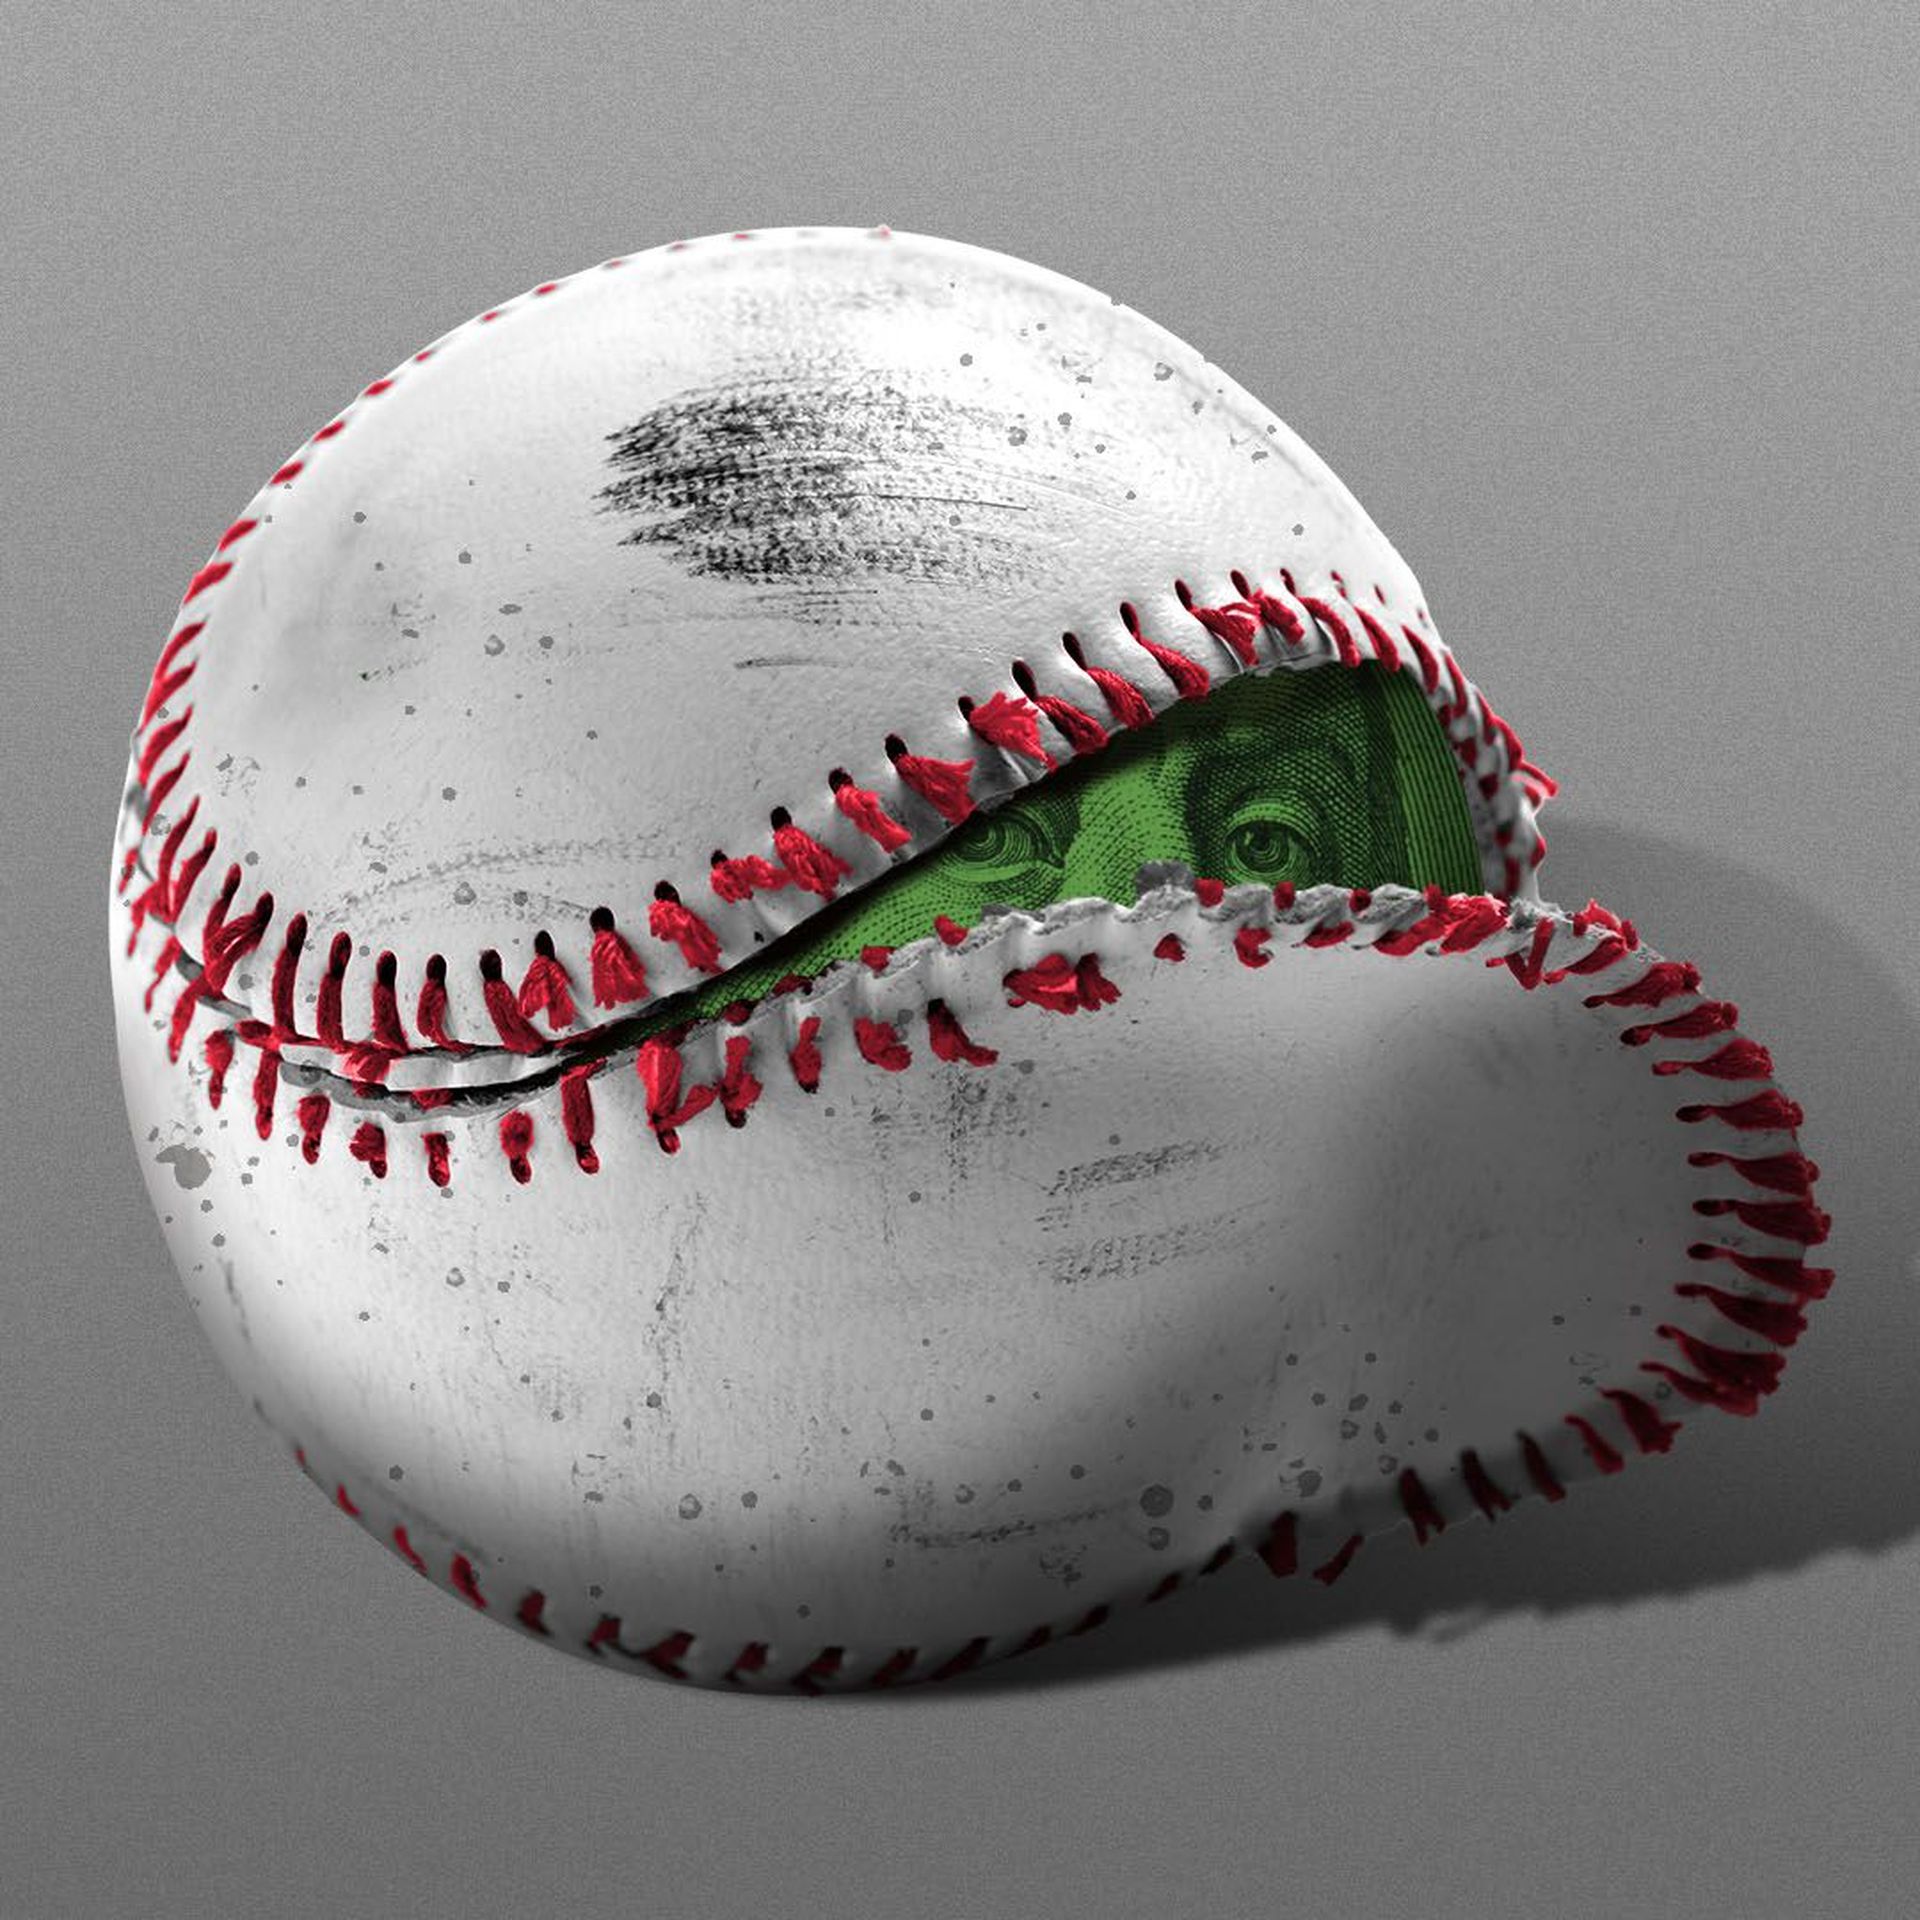 Illustration of a baseball with the stitching coming apart revealing a dollar bill inside